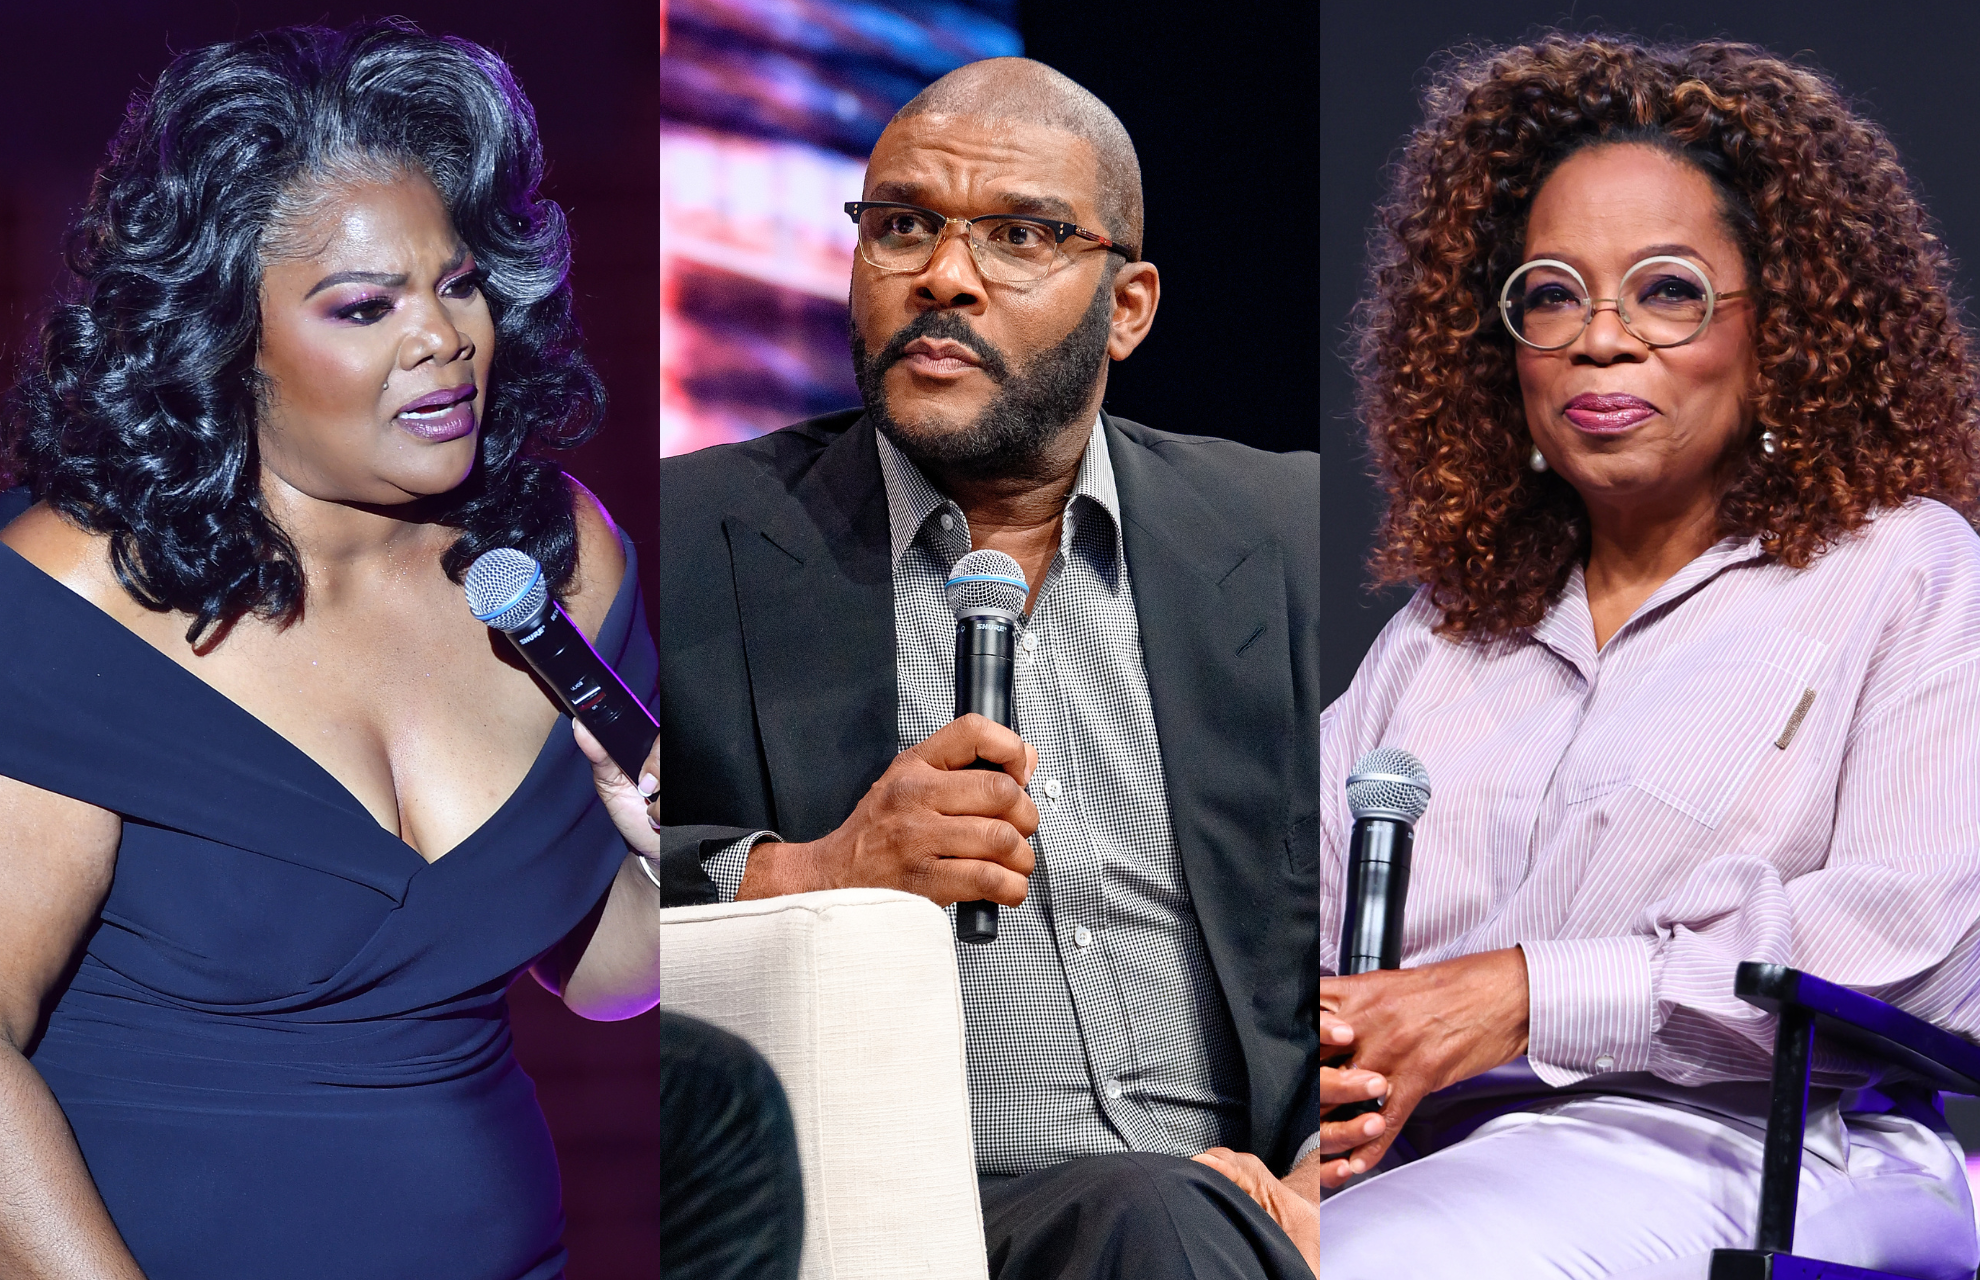 Mo’Nique Calls Oprah, Tyler Perry “Coon Muthaf**kers” In Fiery Rant